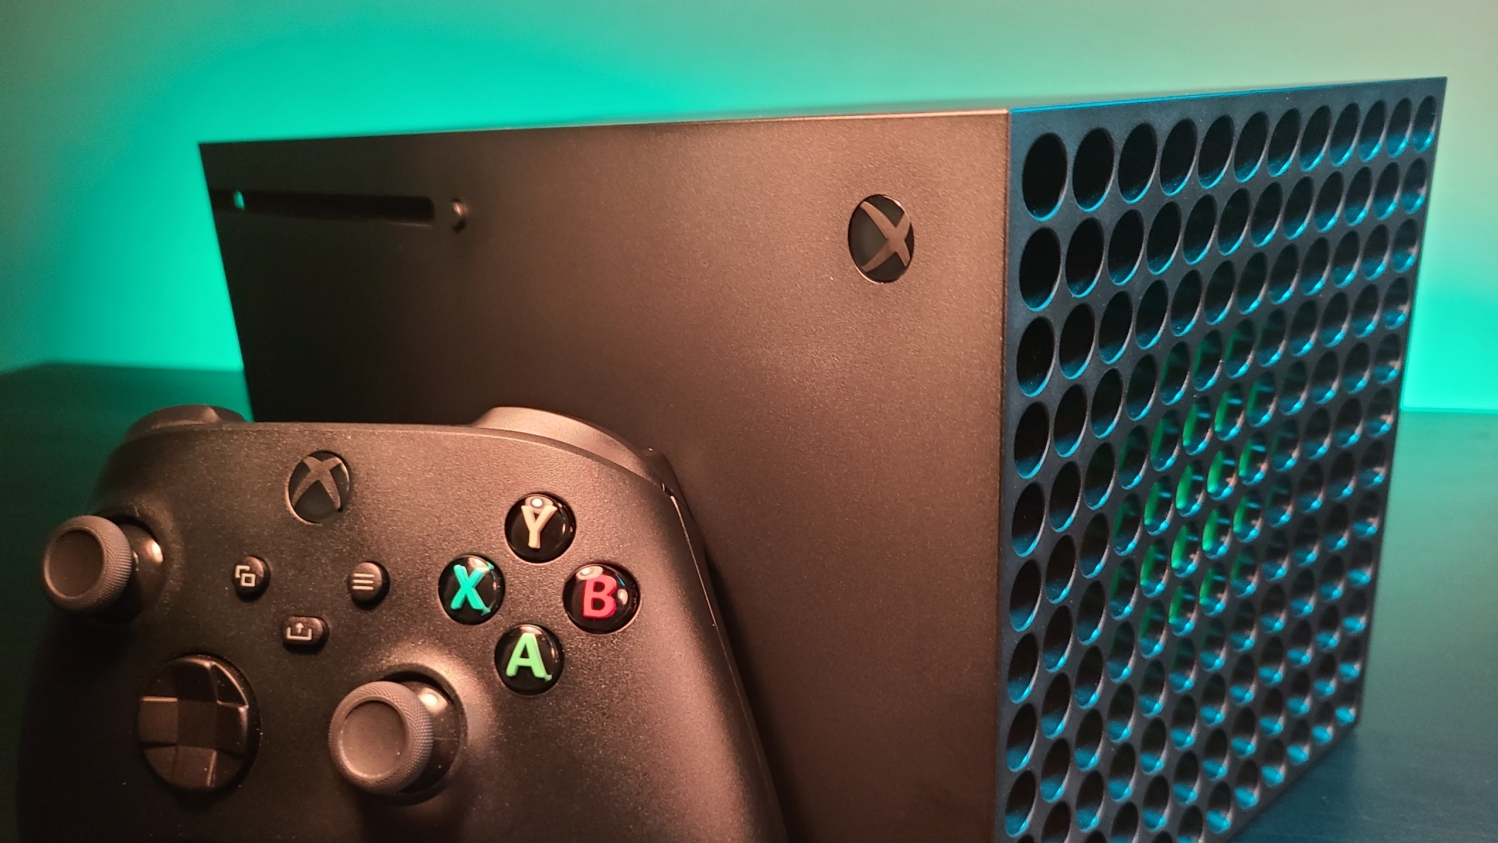 Xbox Consoles Have Never Been Profitable on Their Own, Microsoft Says